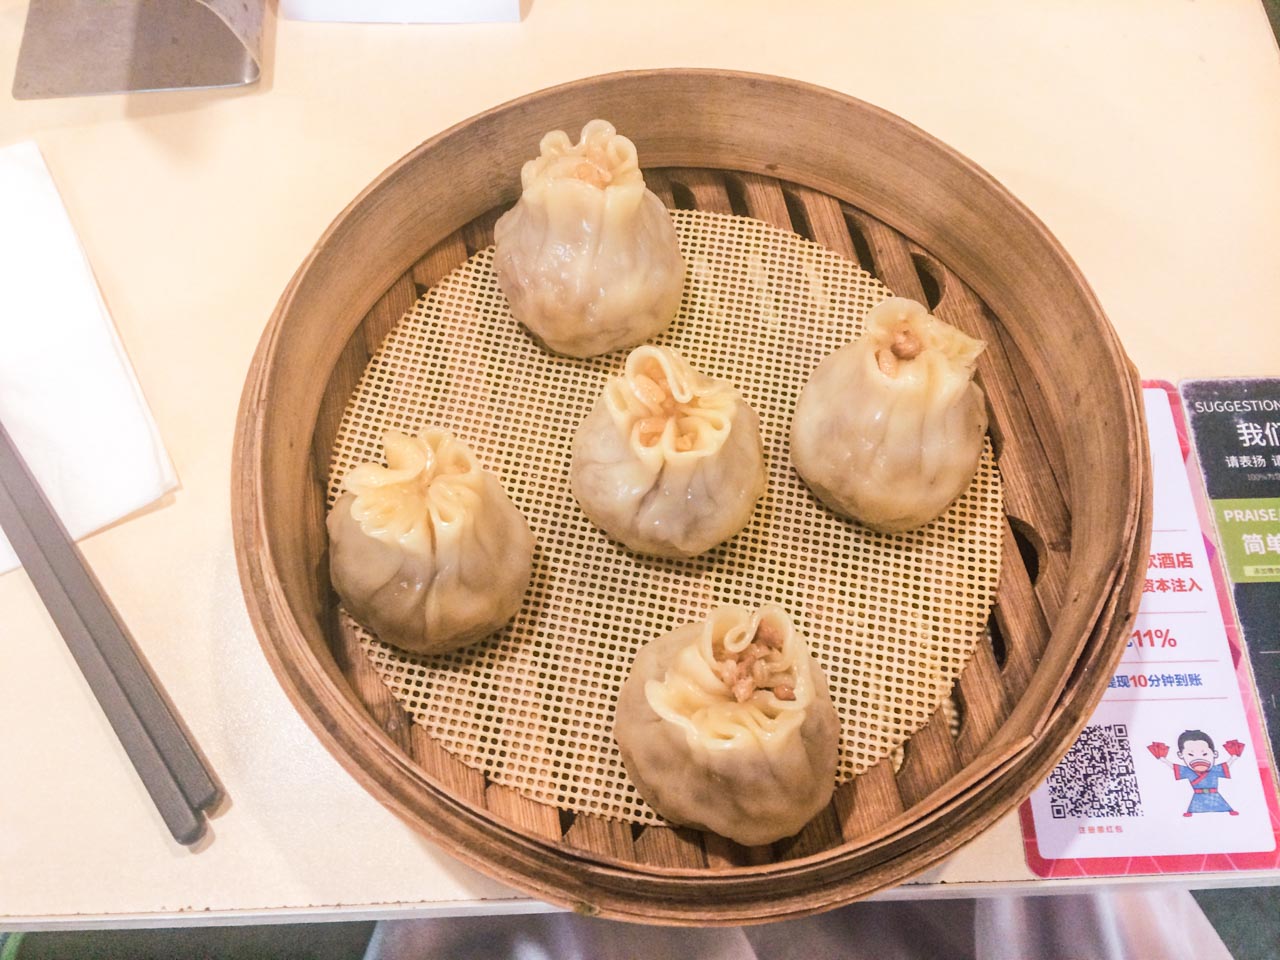 Five Xiao Long Bao dumplings in a traditional bamboo steamer placed on a wooden table